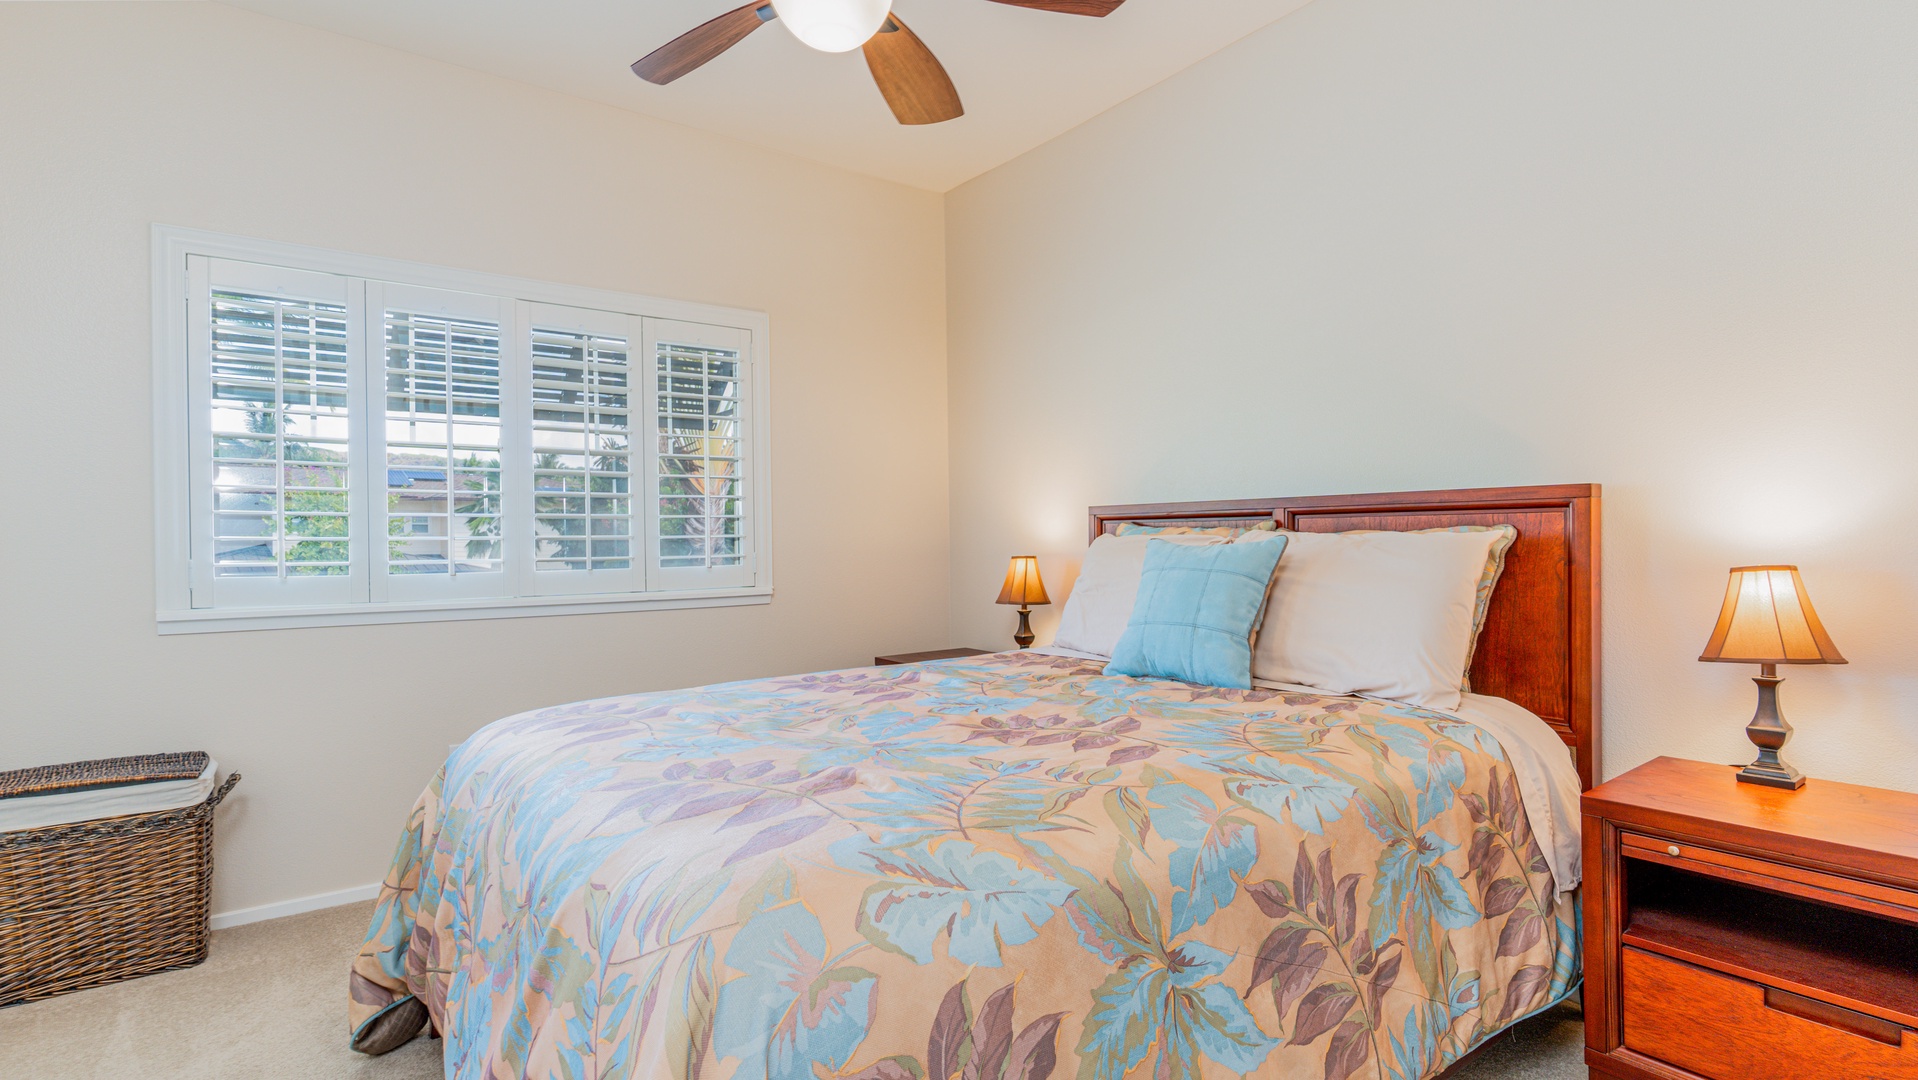 Kapolei Vacation Rentals, Coconut Plantation 1234-2 - The third guest bedroom located upstairs in the home.